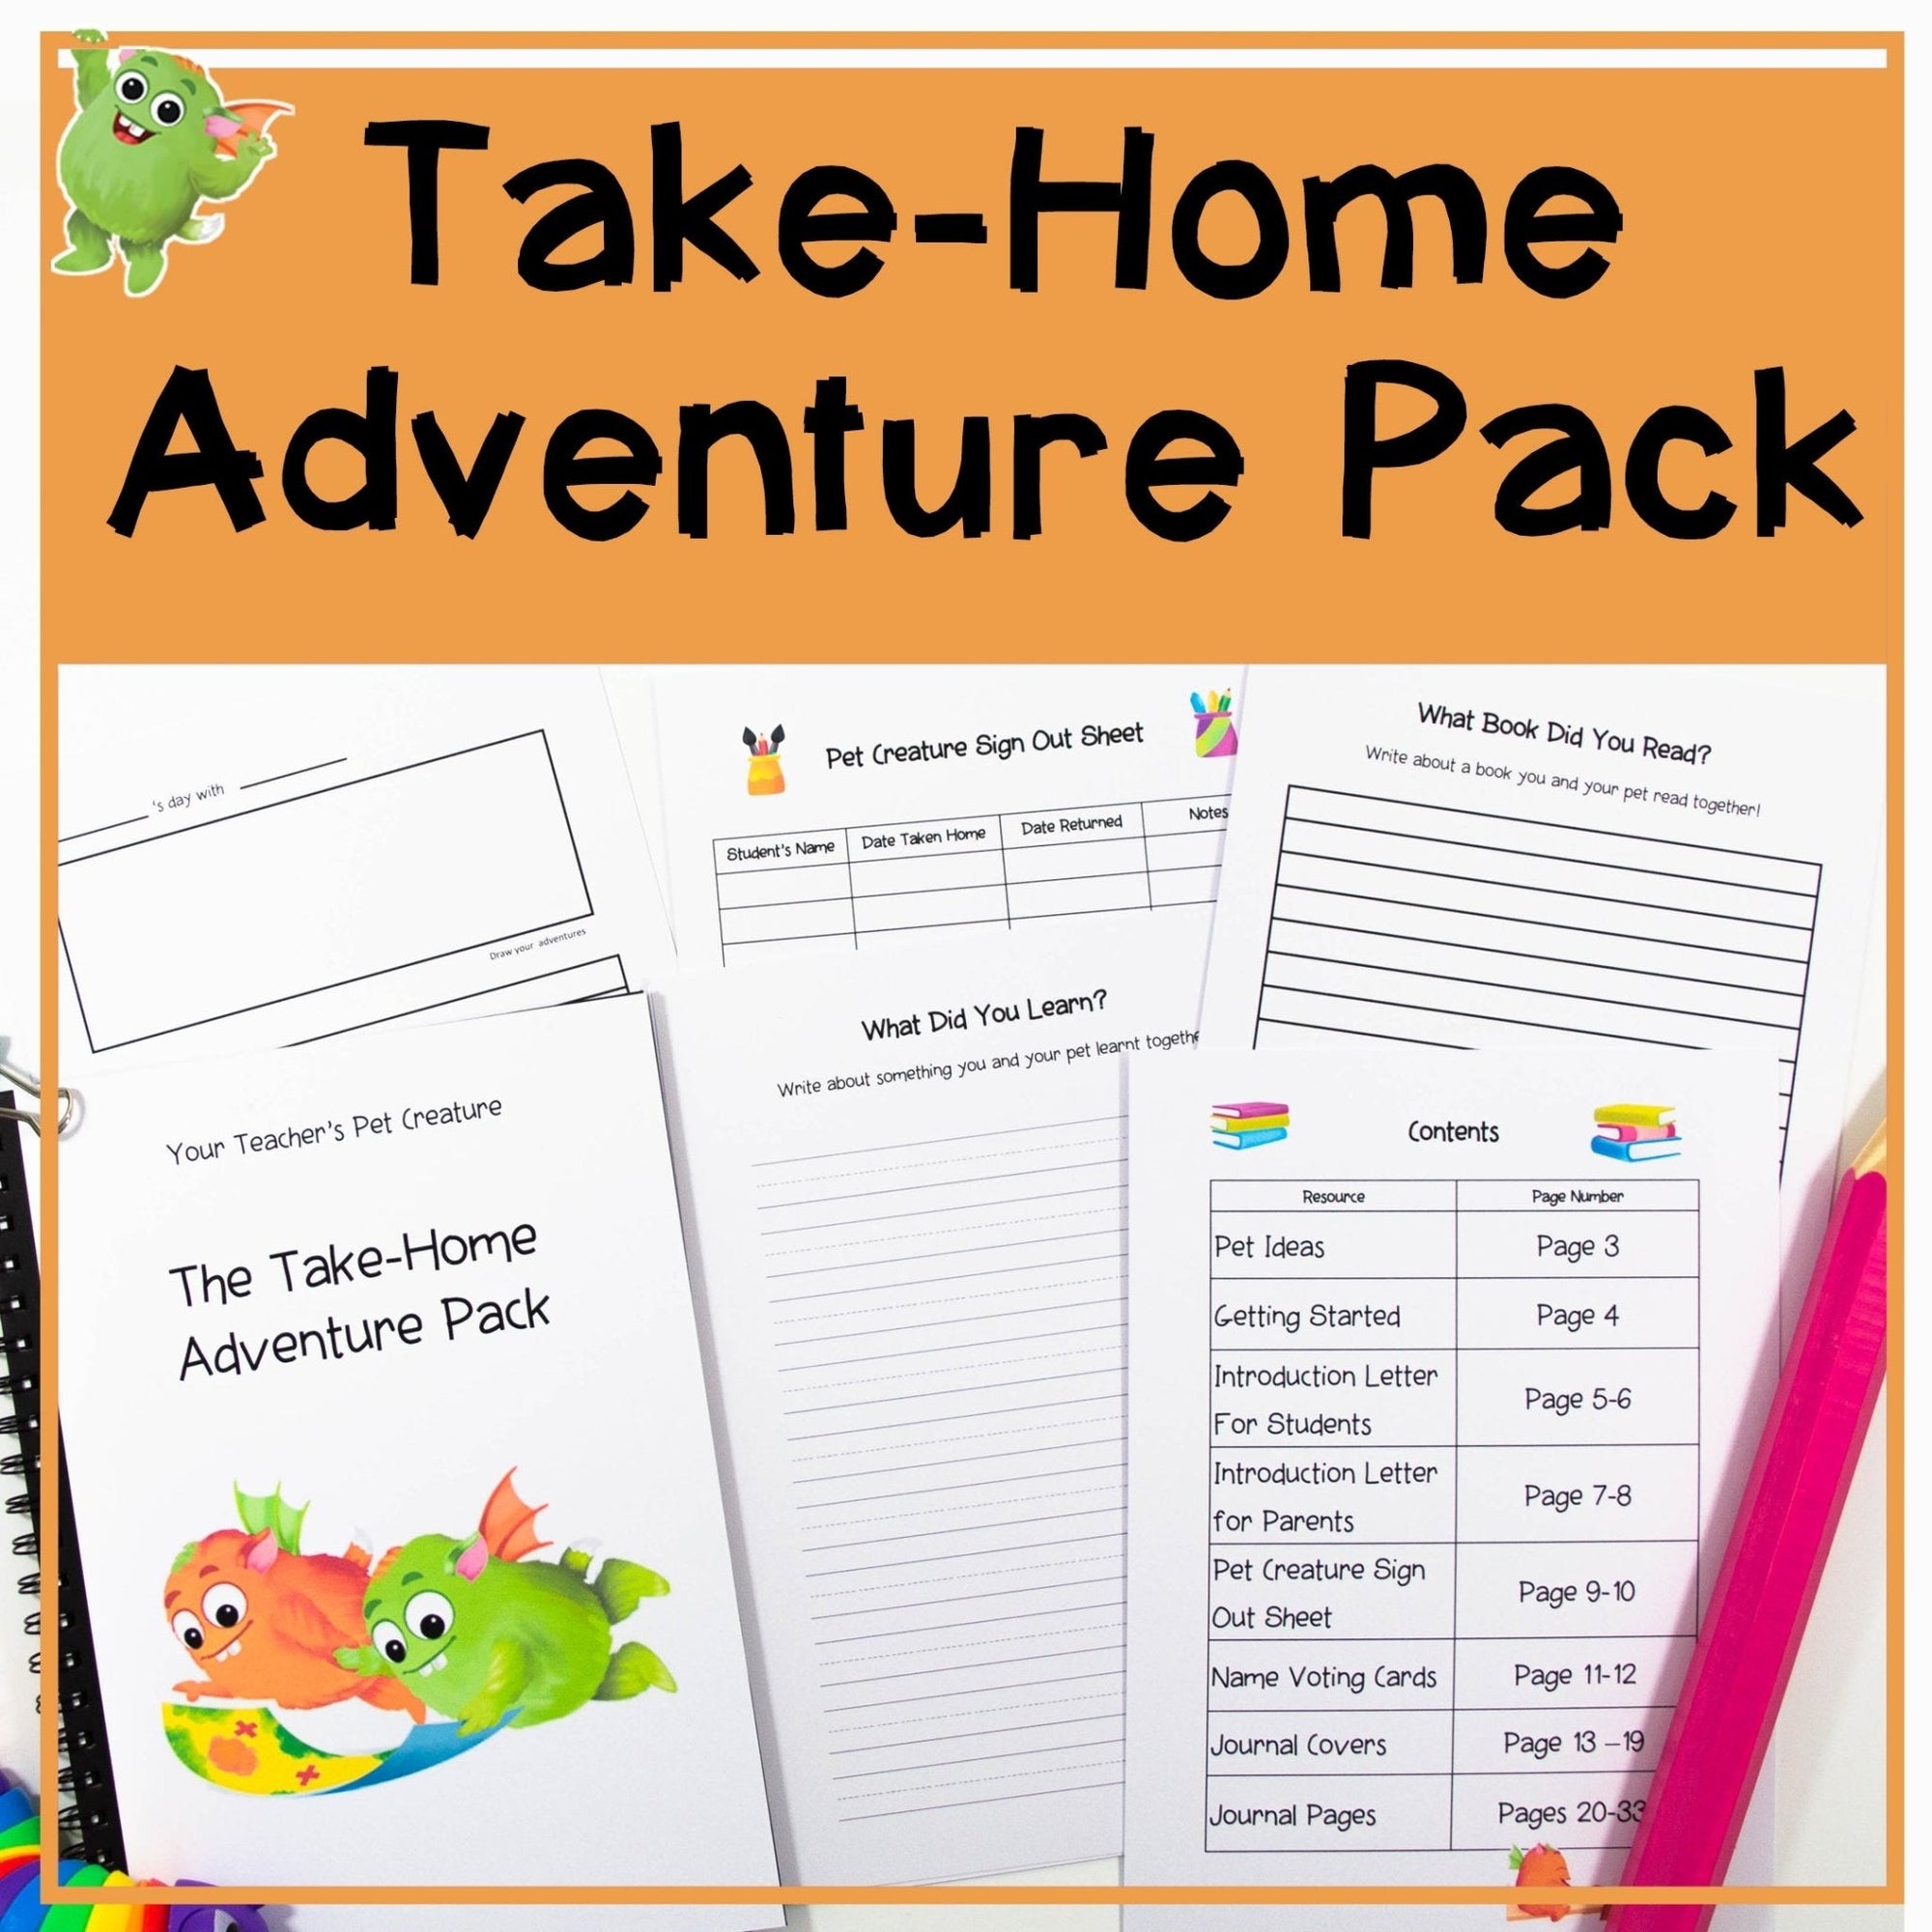 Take Home Adventure Pack - Green and Orange - Your Teacher's Pet Creature